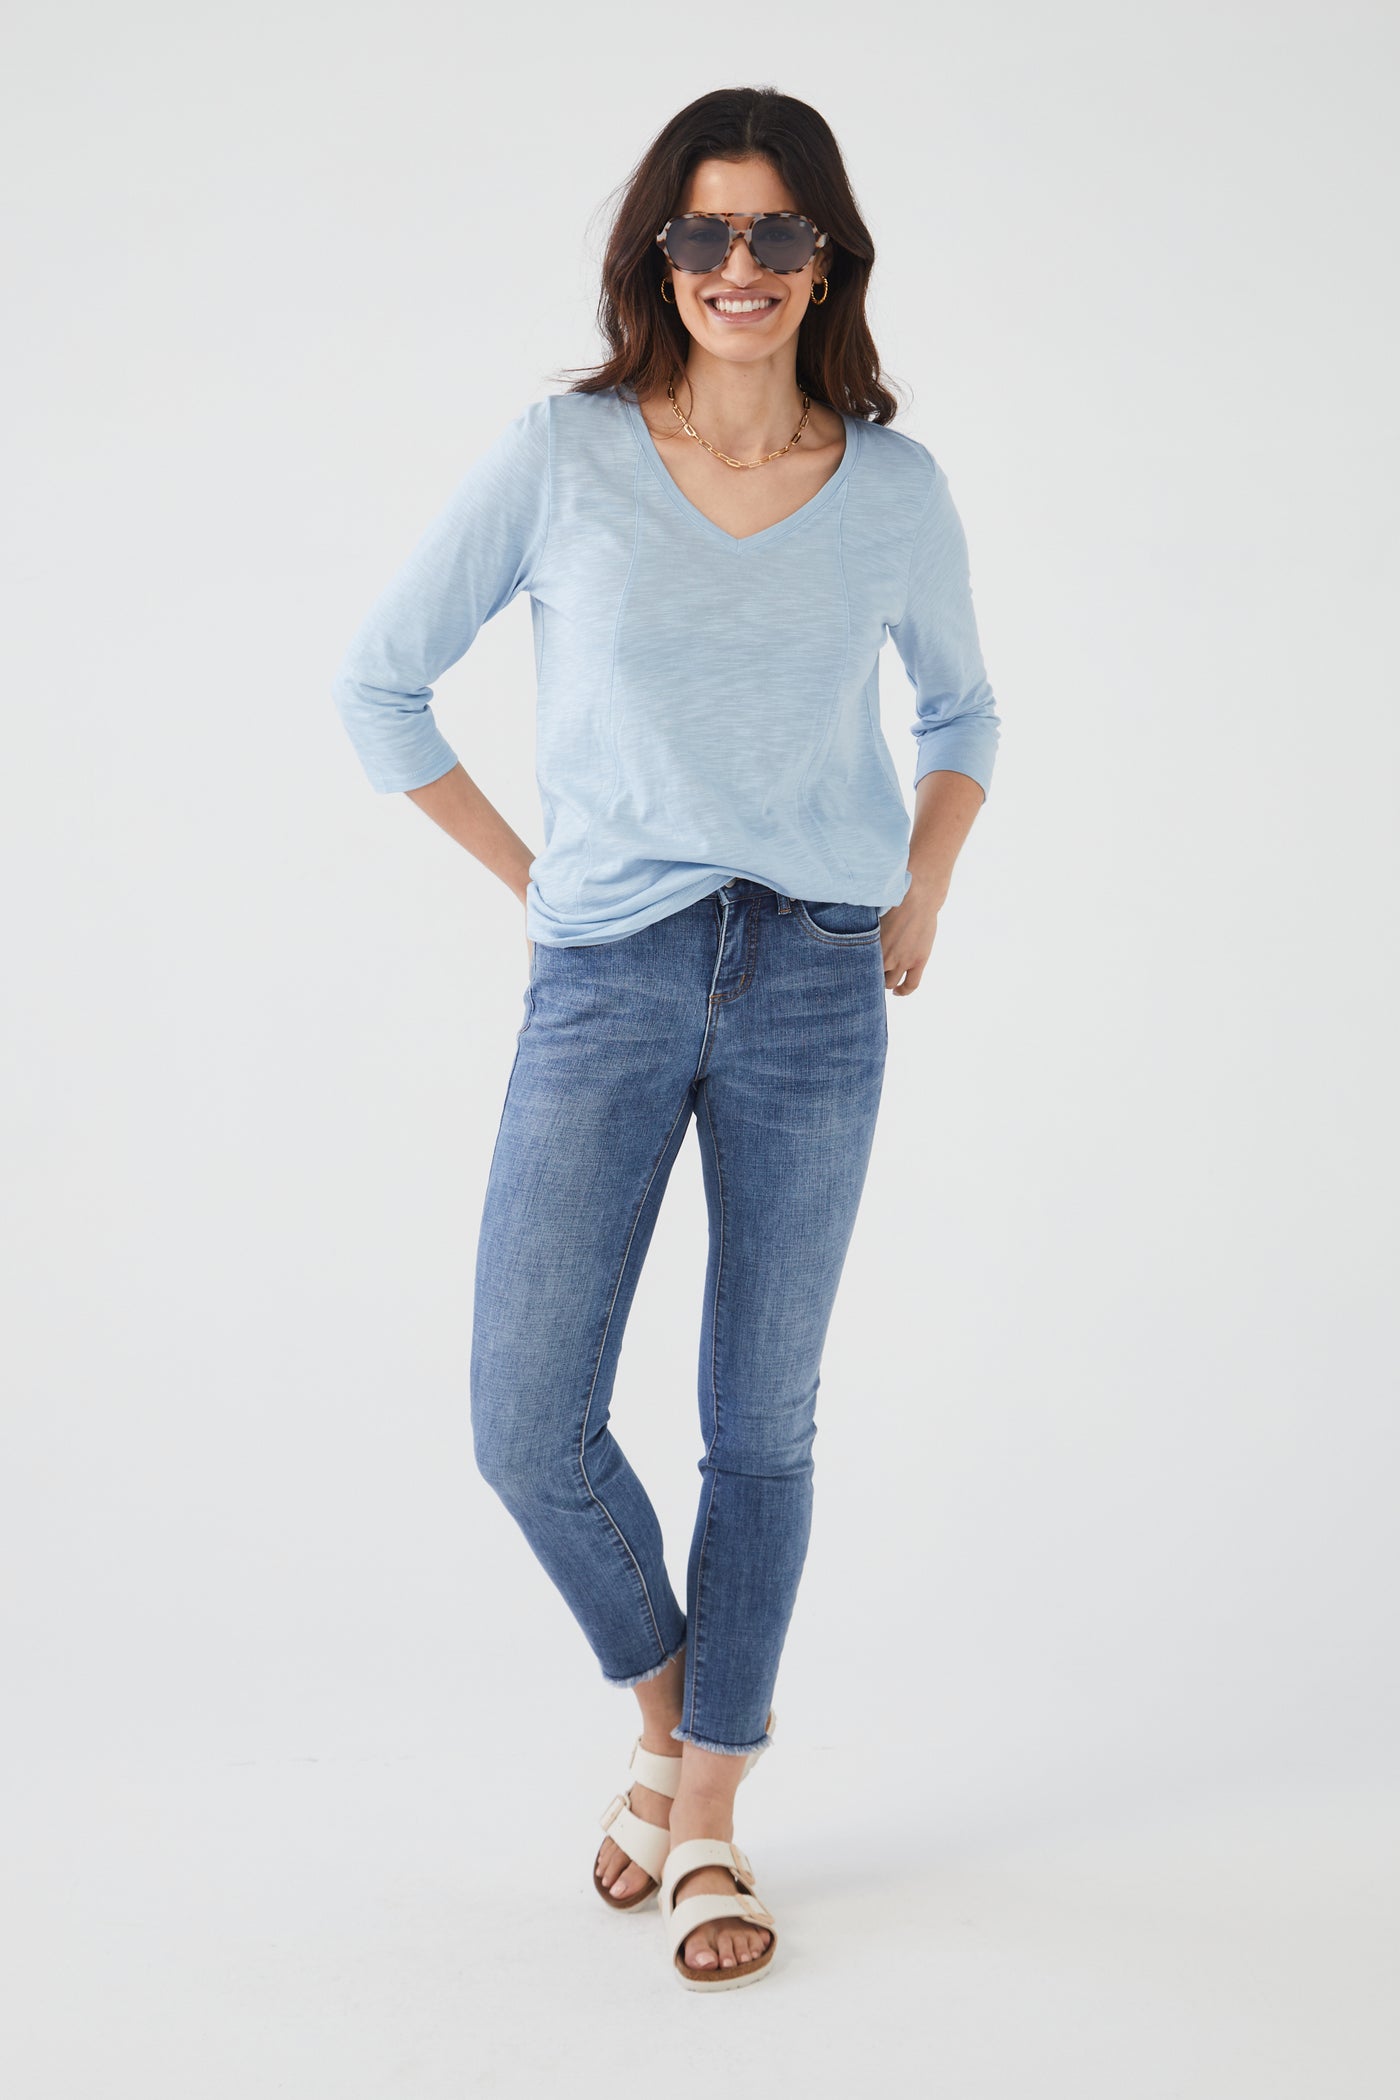 French Dressing Jeans V-Neck Top in Solid Slub Jersey 